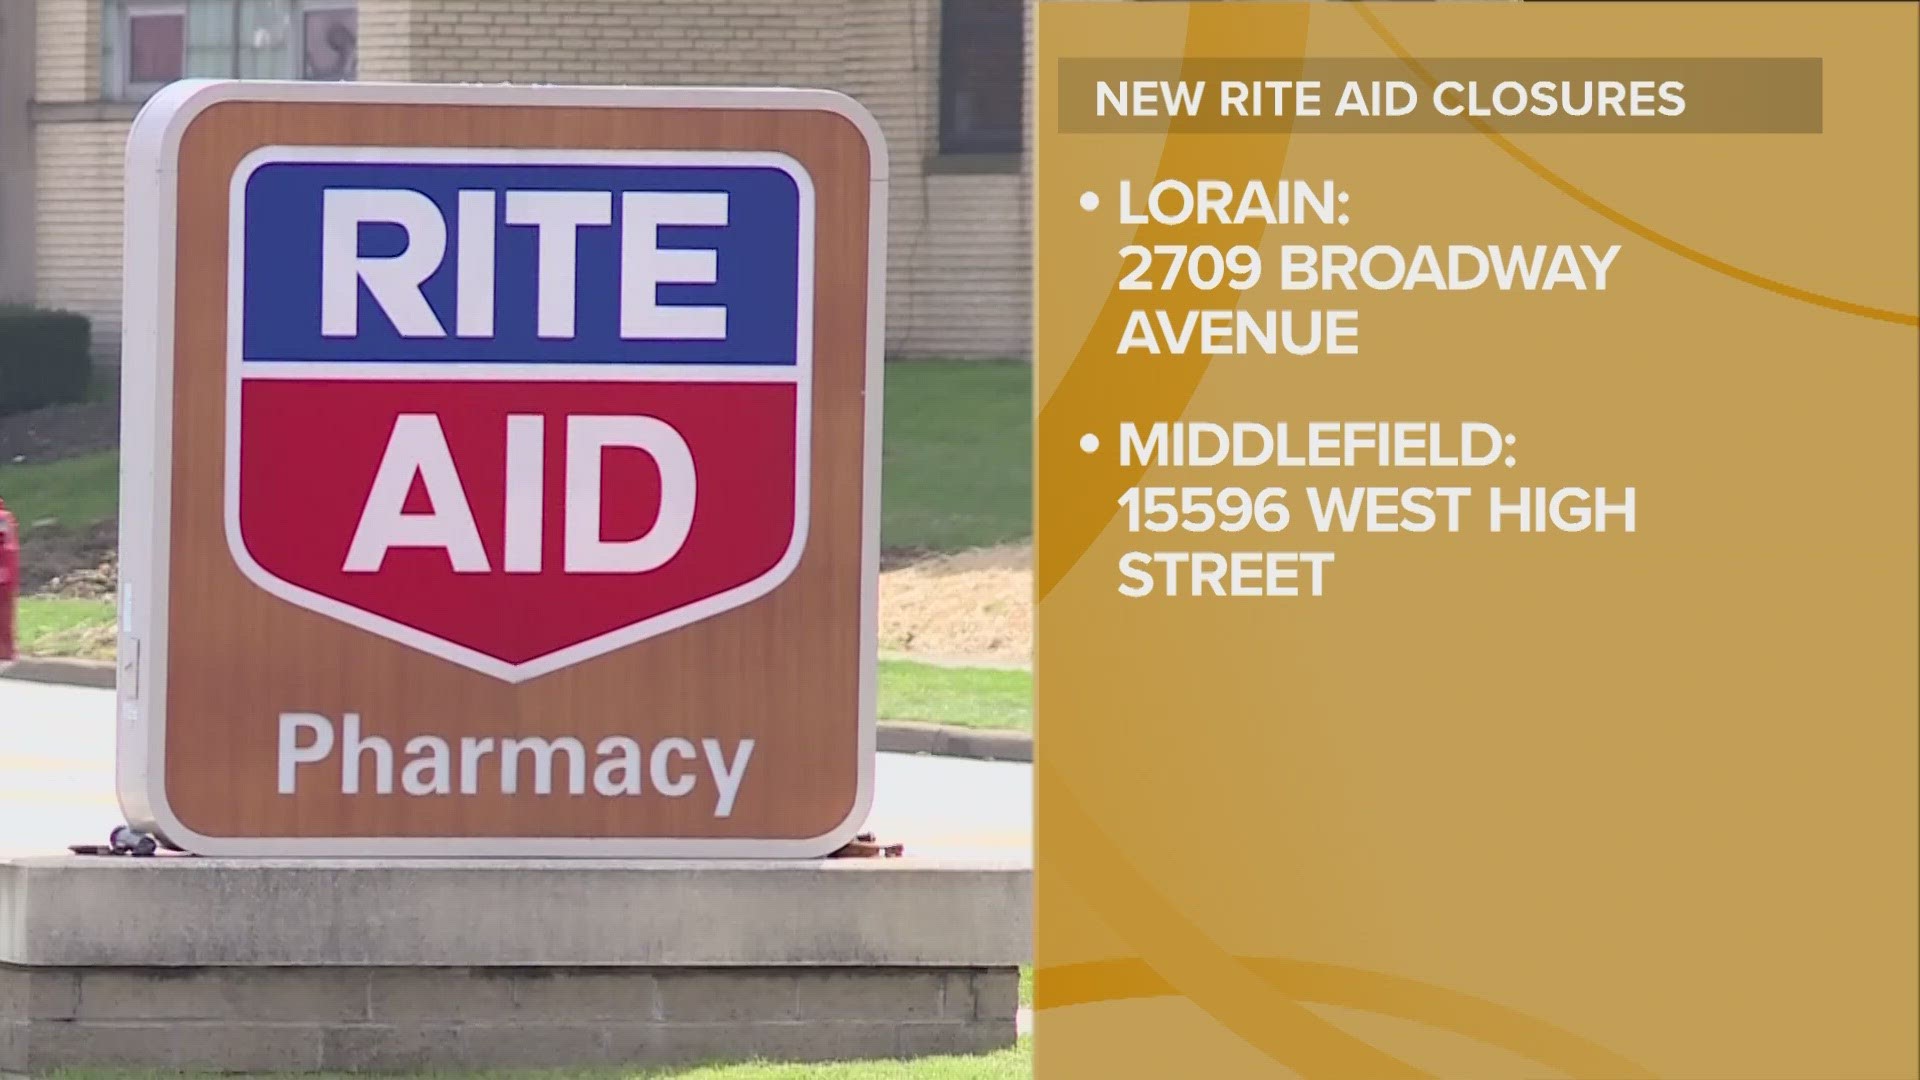 The closures include the Rite Aid store on Broadway Avenue in Lorain and the location on West High Street in Middlefield.